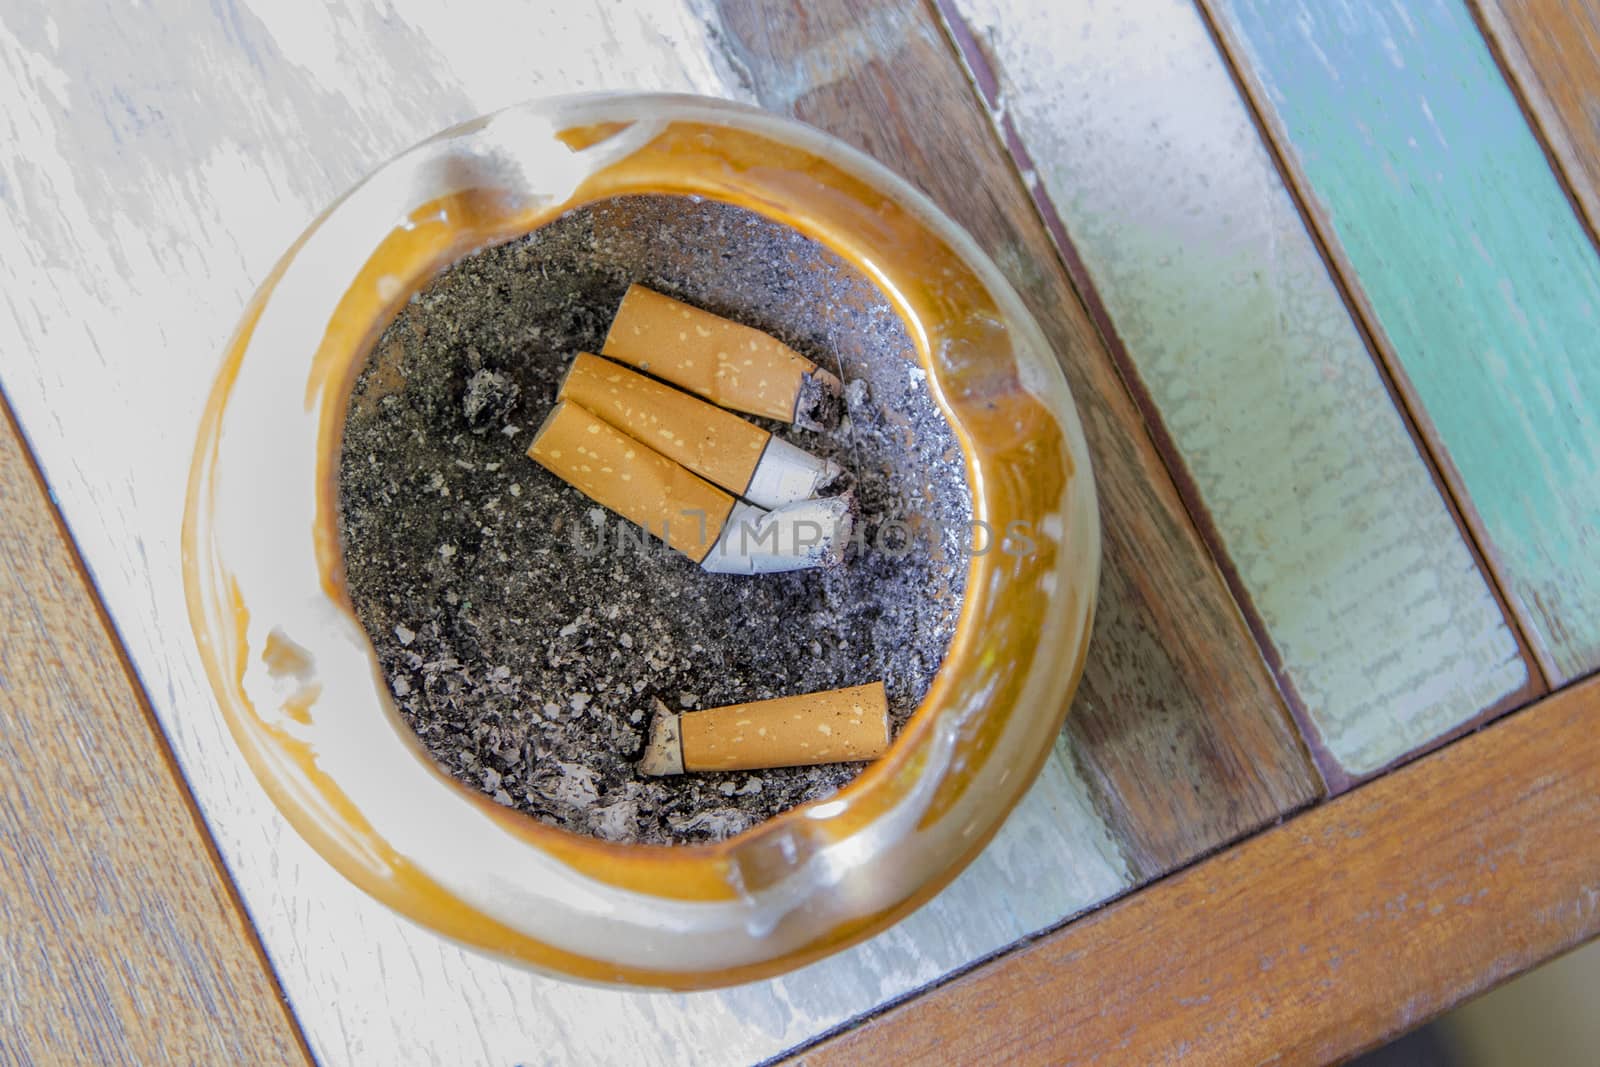 The top of the ashtray placed on the table.